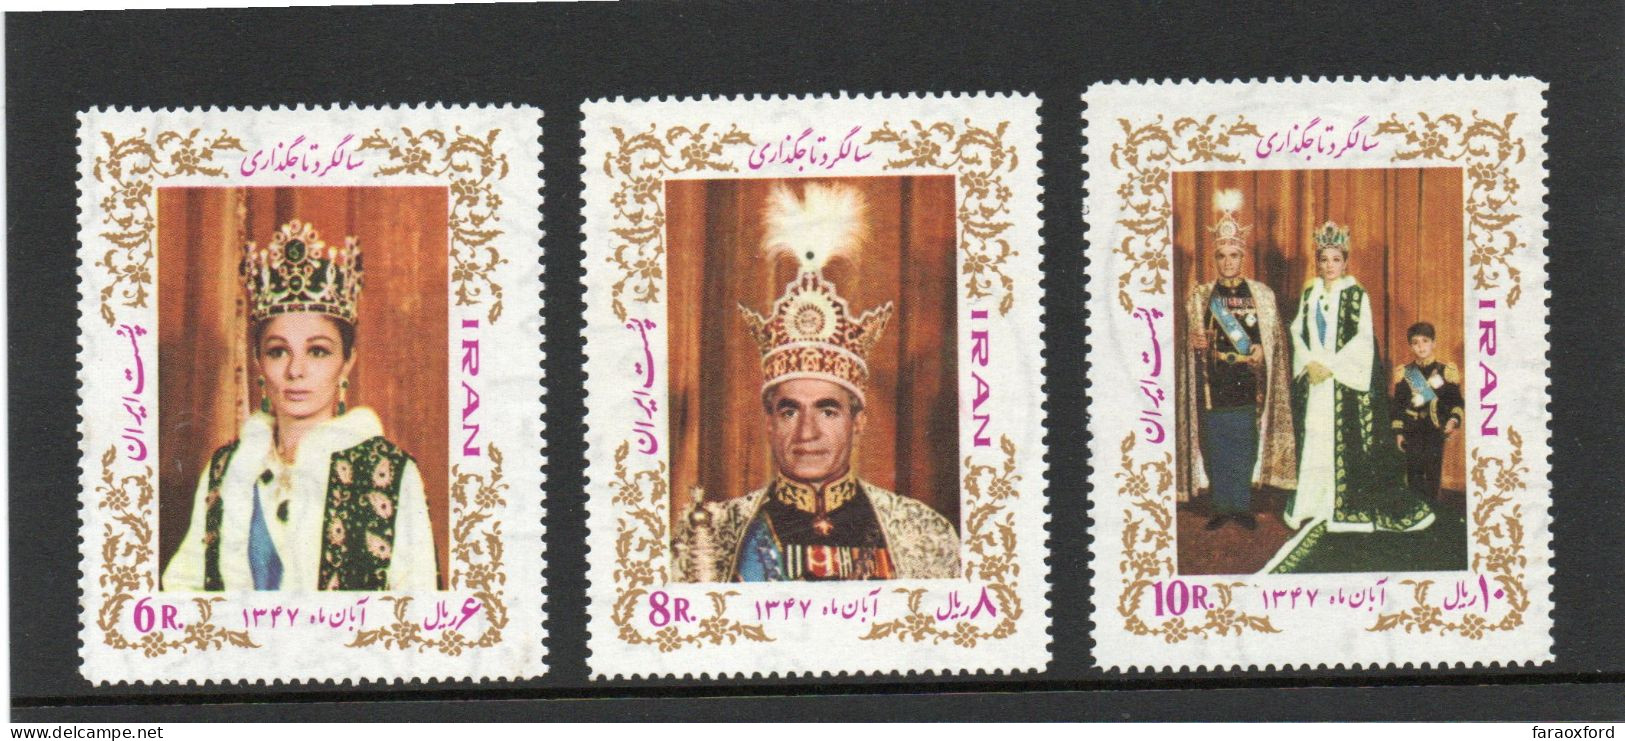 IRAN - ايران - PERSIA - 1968 - CORONATION - COMPLETE SET OF STAMPS - VERY GOOD MINT - Irán